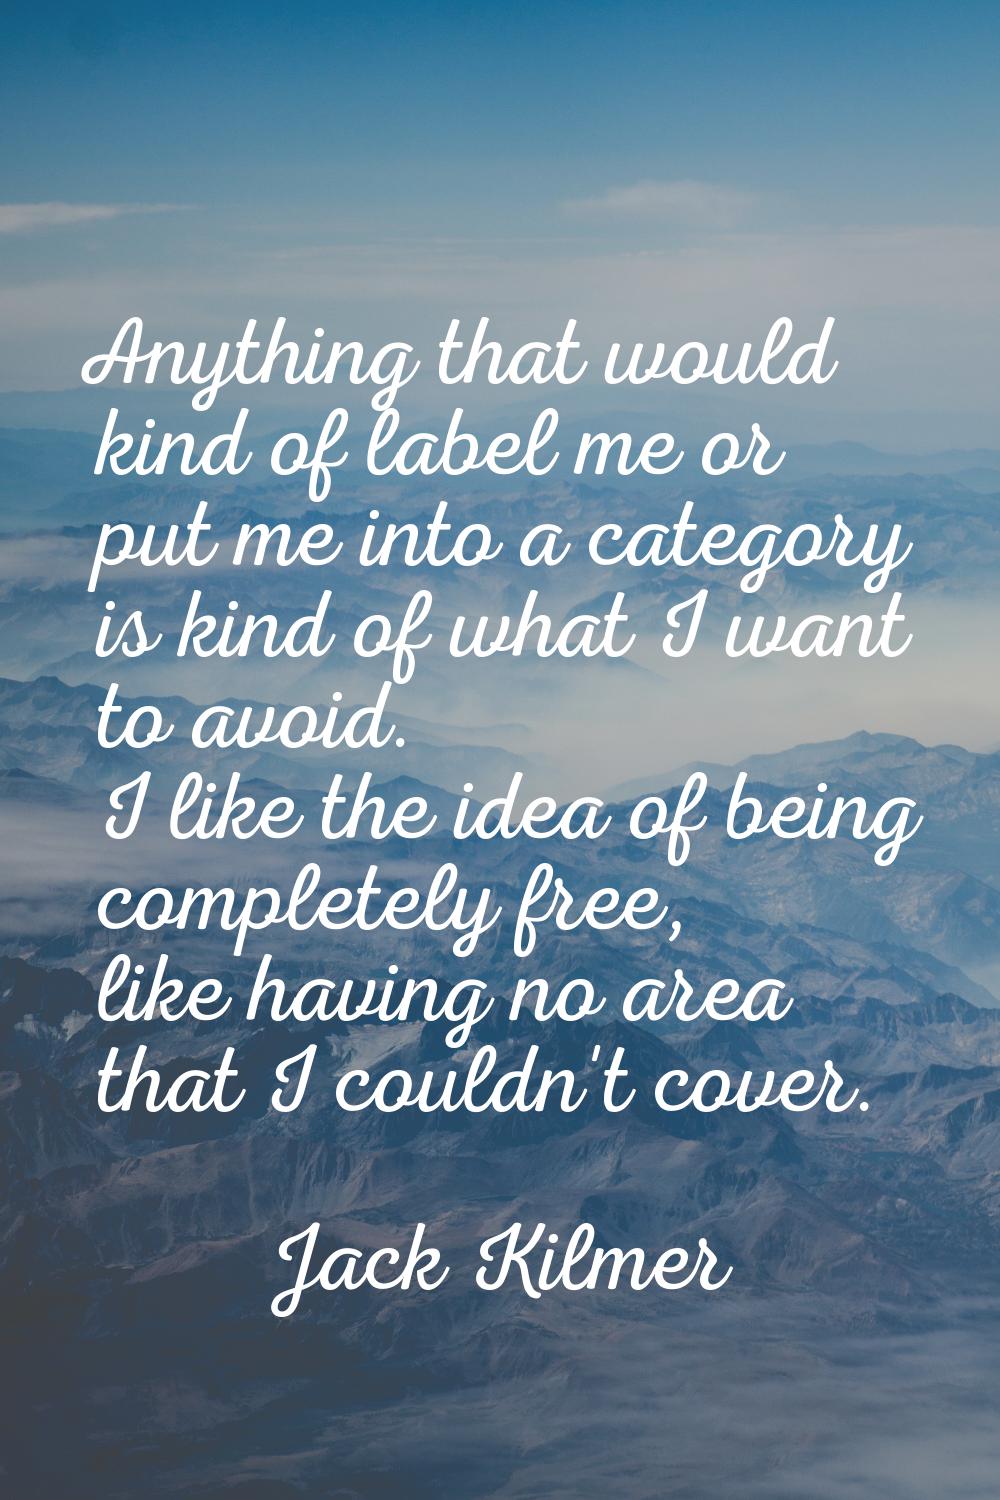 Anything that would kind of label me or put me into a category is kind of what I want to avoid. I l